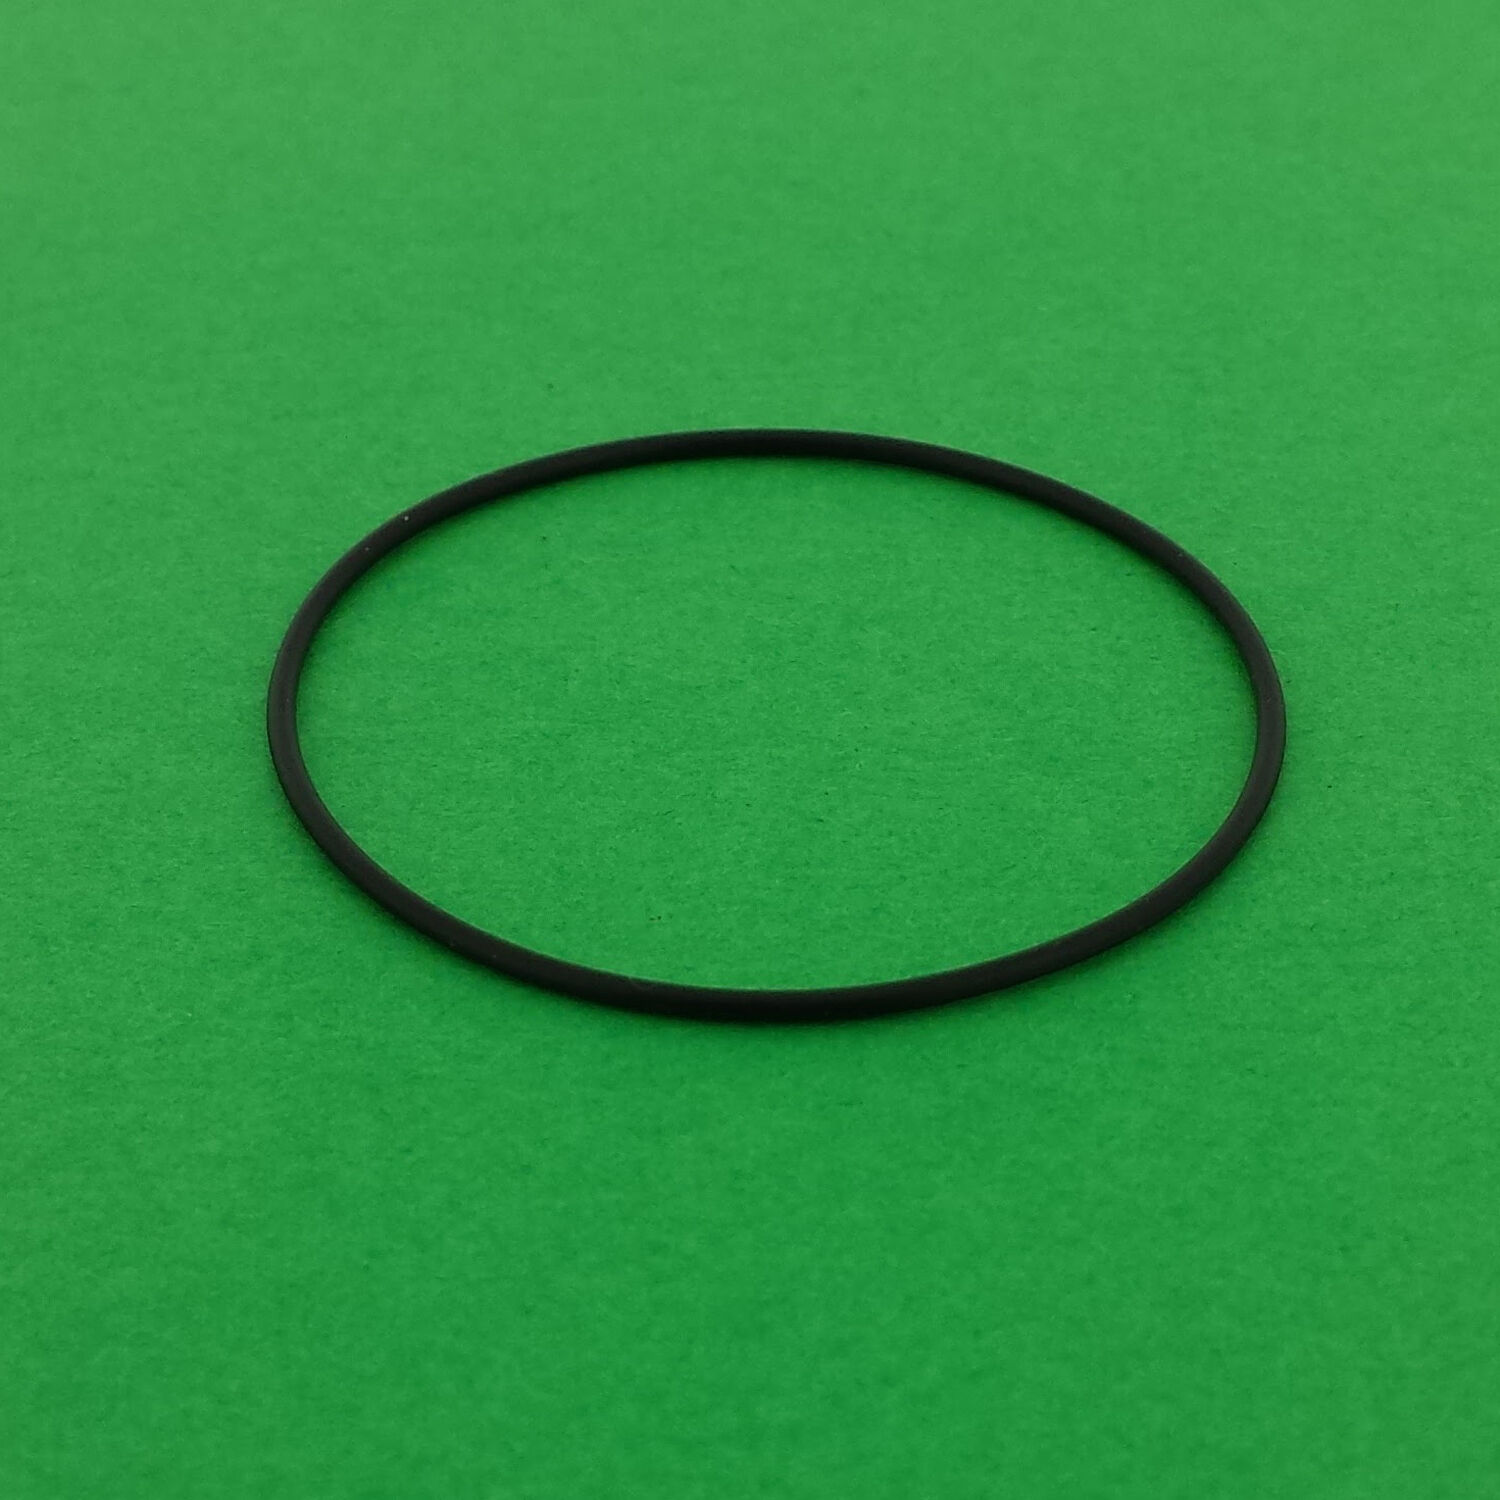 Case Back Gasket to Fit Rolex GMT, Submariner, 29-325-10 For 16800 